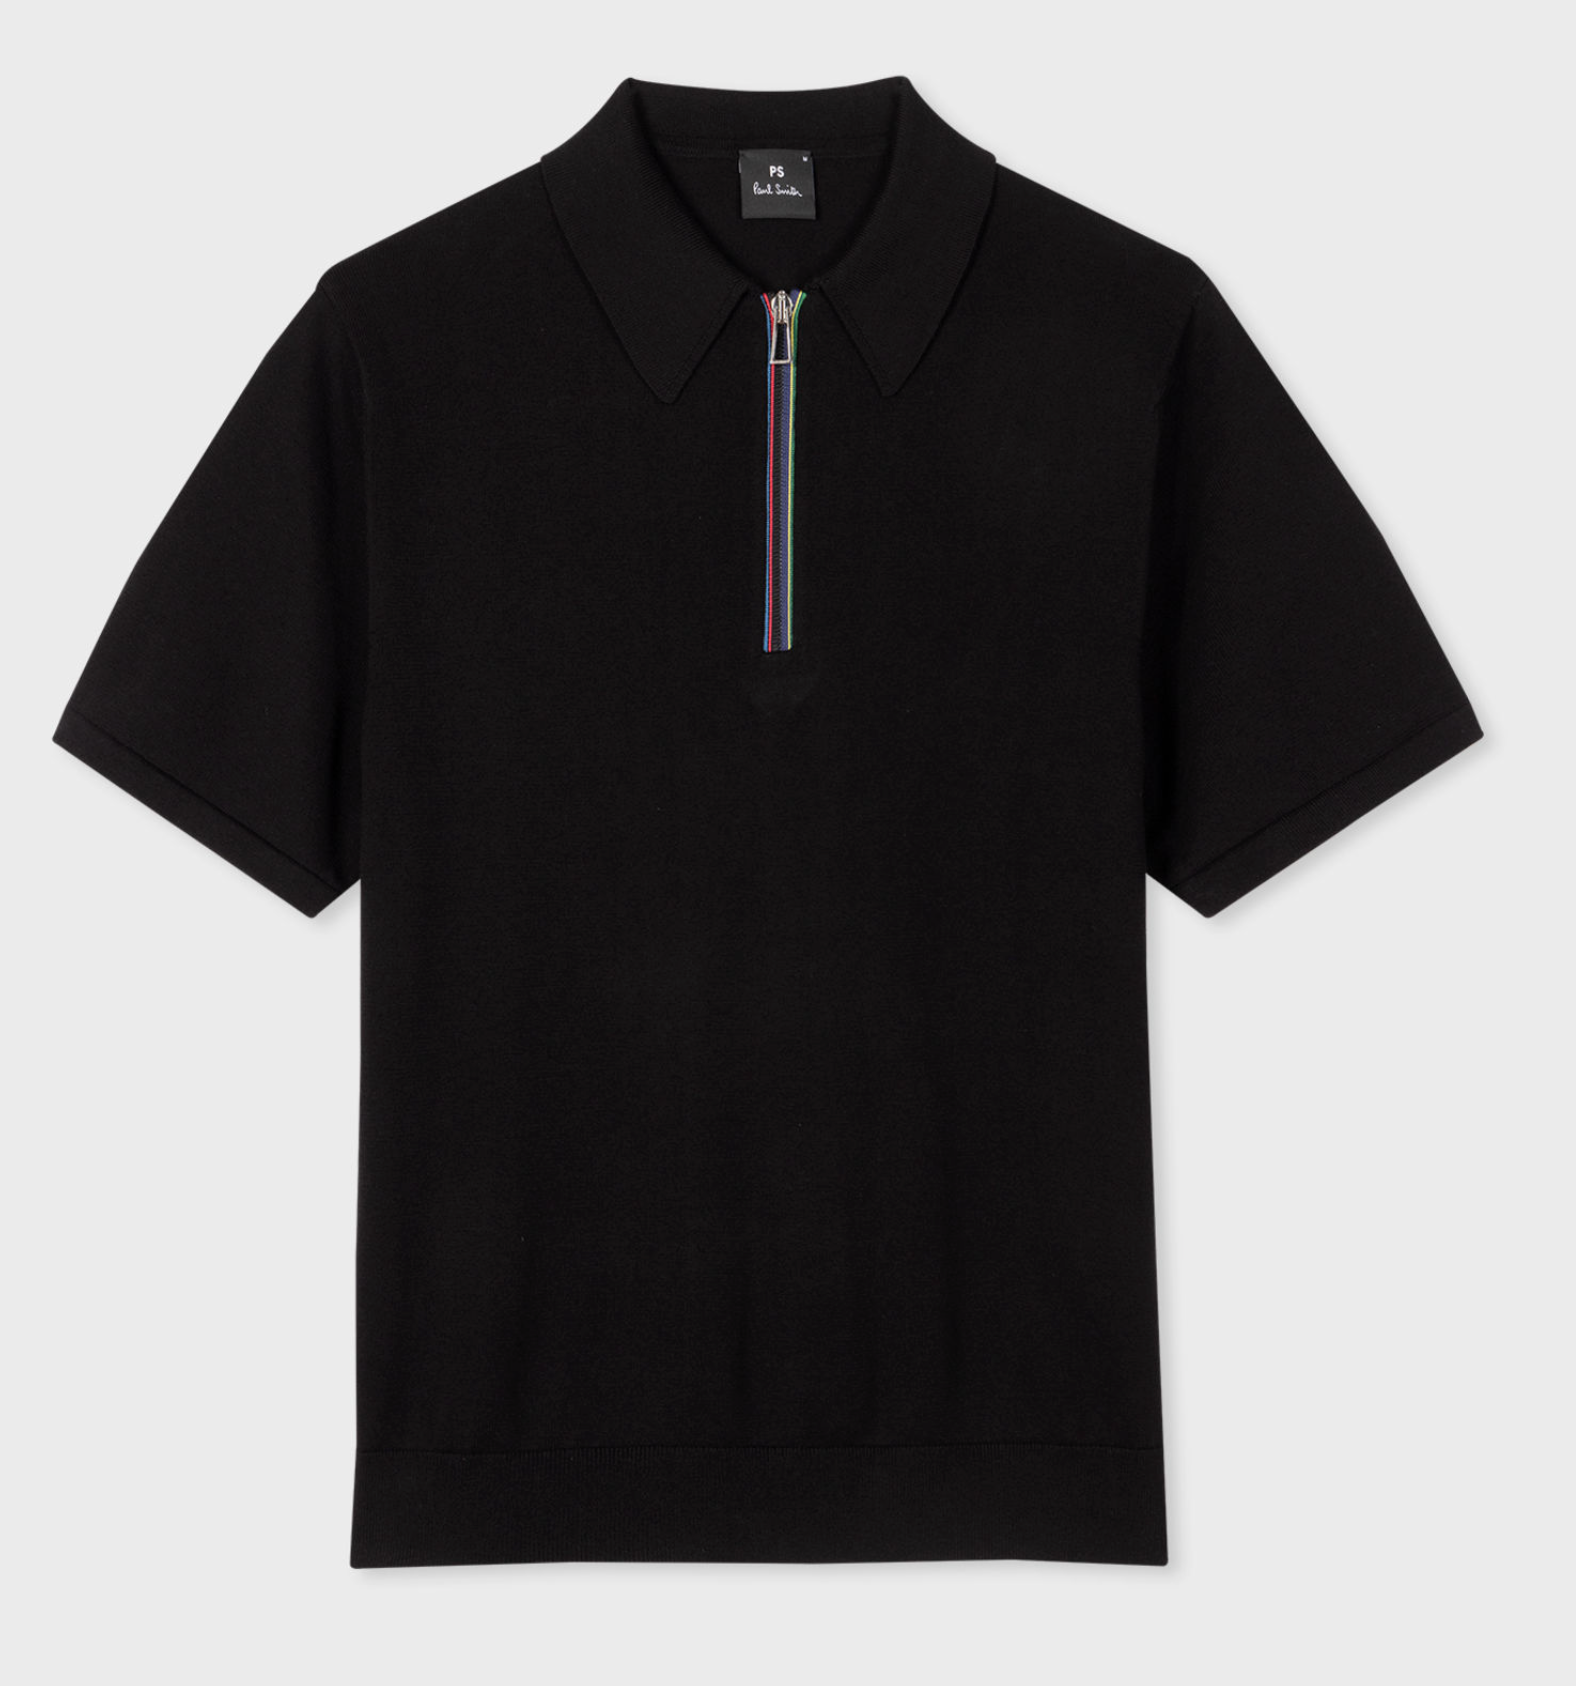 PS Paul Smith Knitted Zip Polo Shirt Black